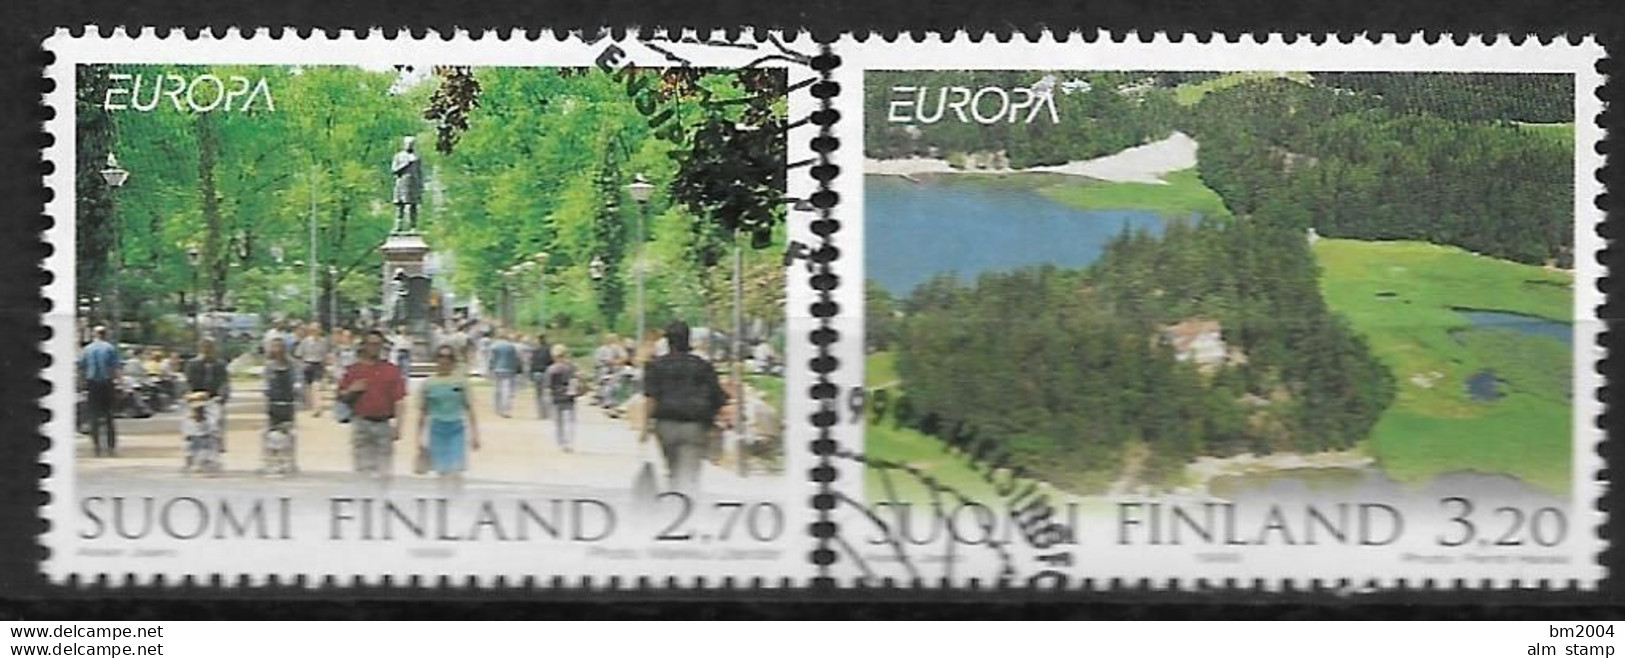 1999 Finnland   Mi. 1474-5  Used   Europa: Natur- Und Nationalparks - Used Stamps